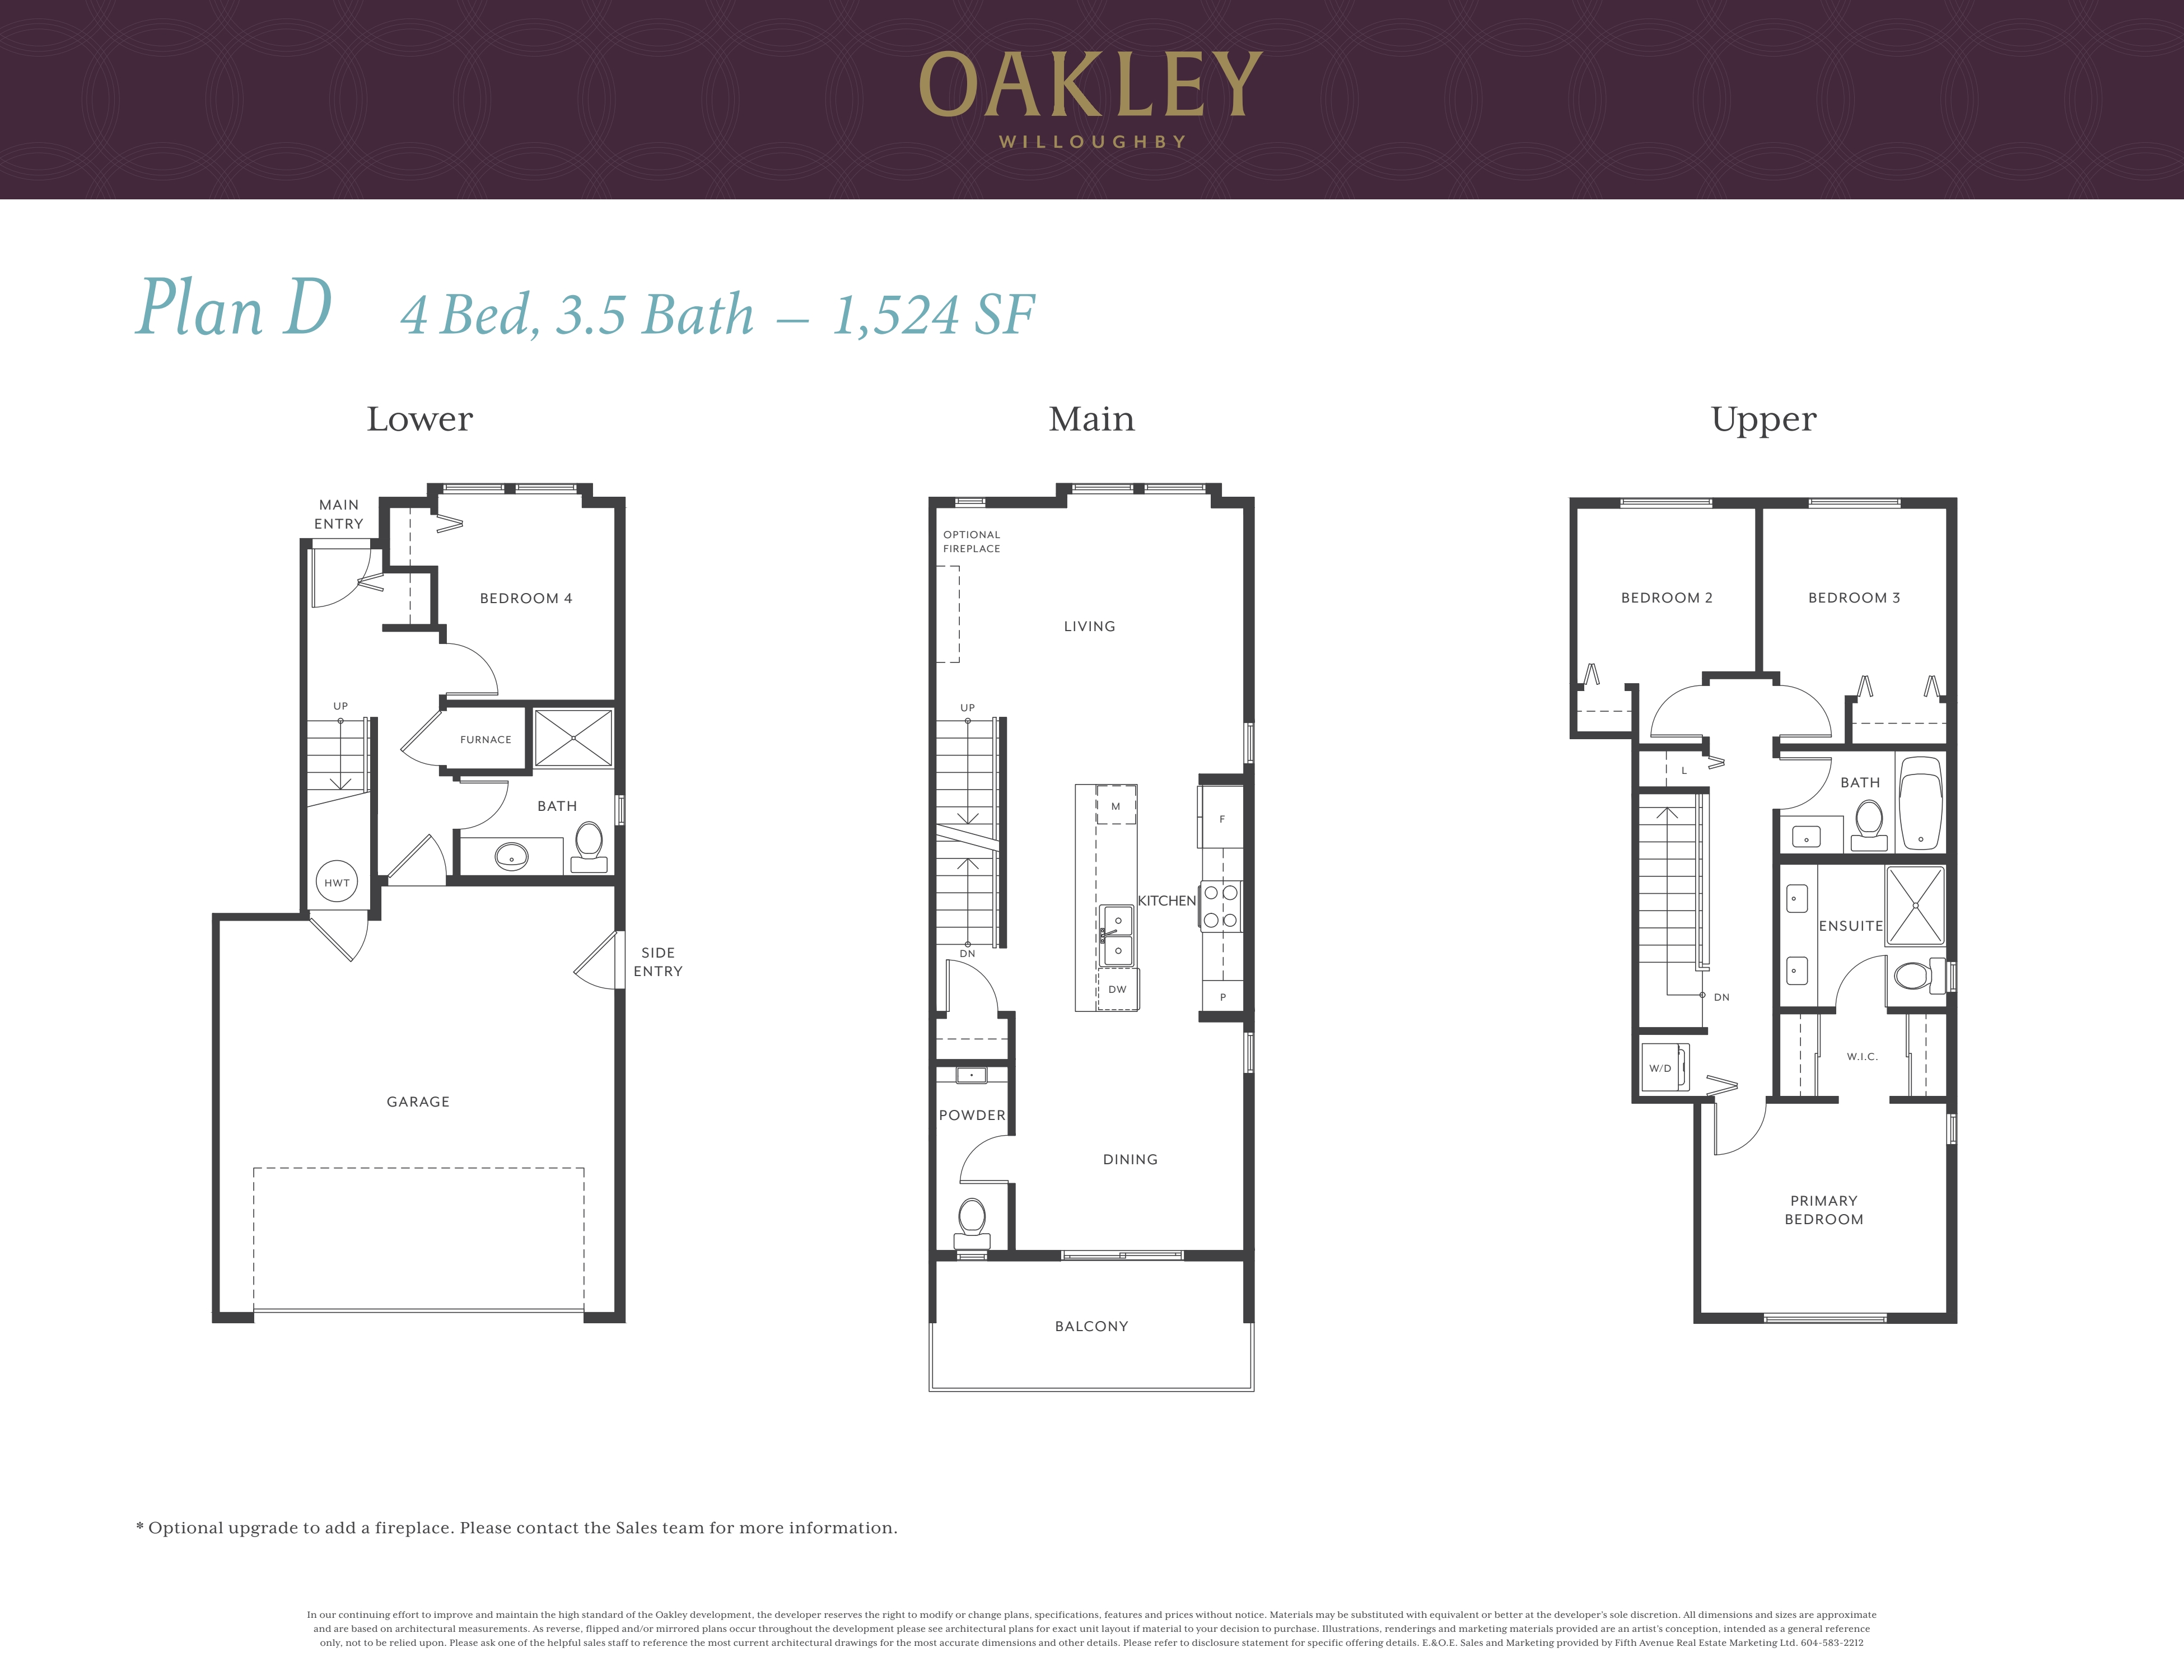  Floor Plan of Oakley Towns with undefined beds